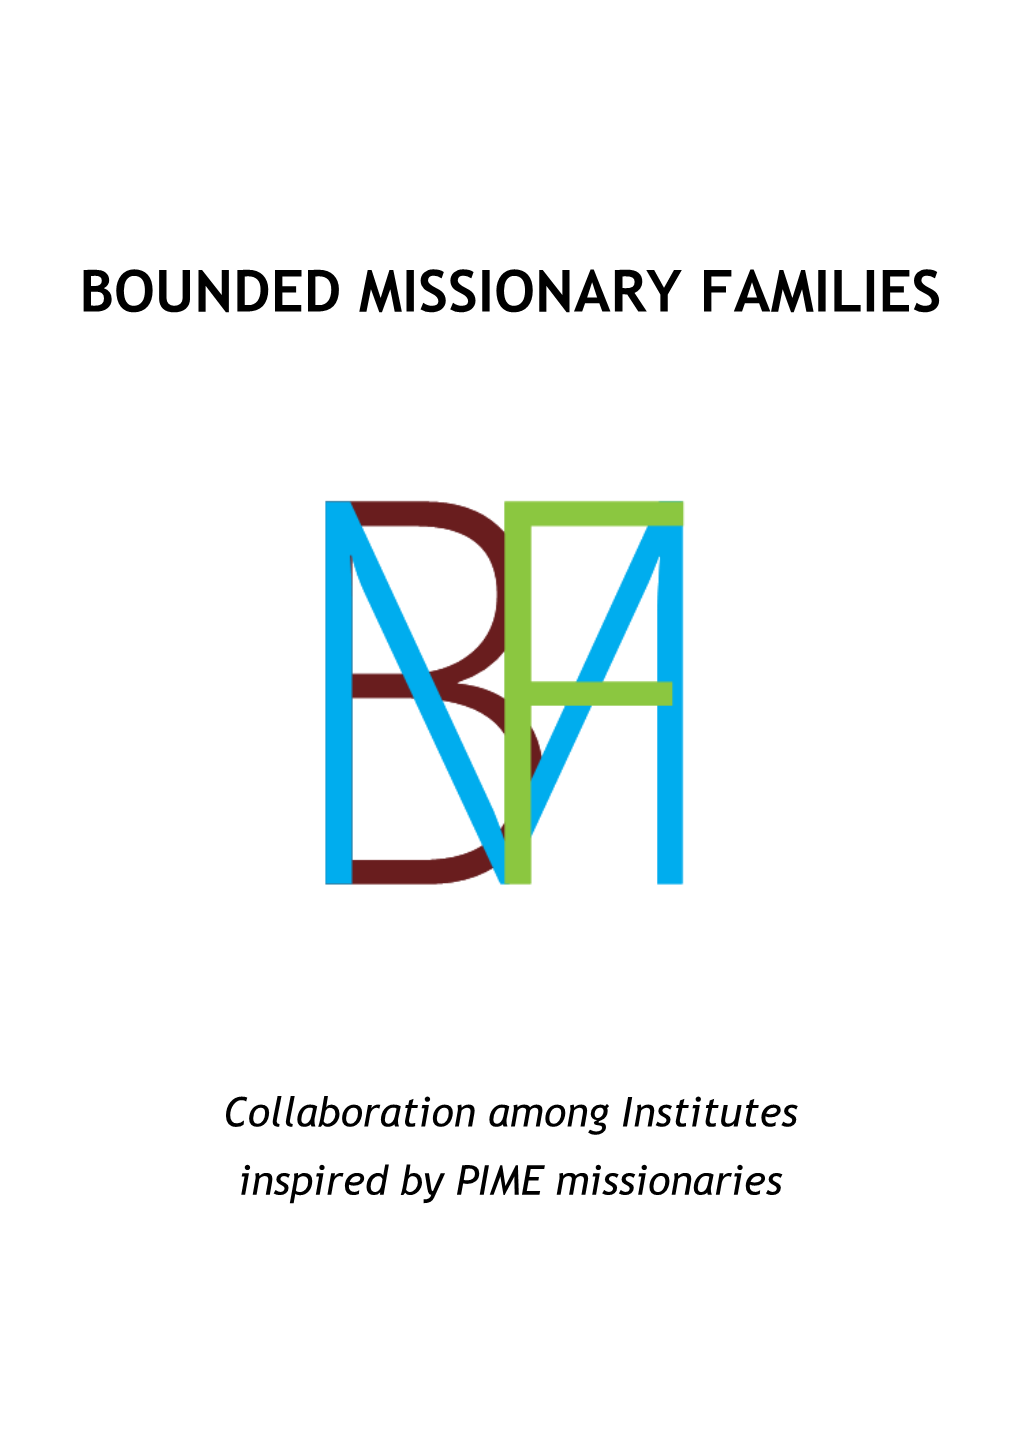 Bounded Missionary Families